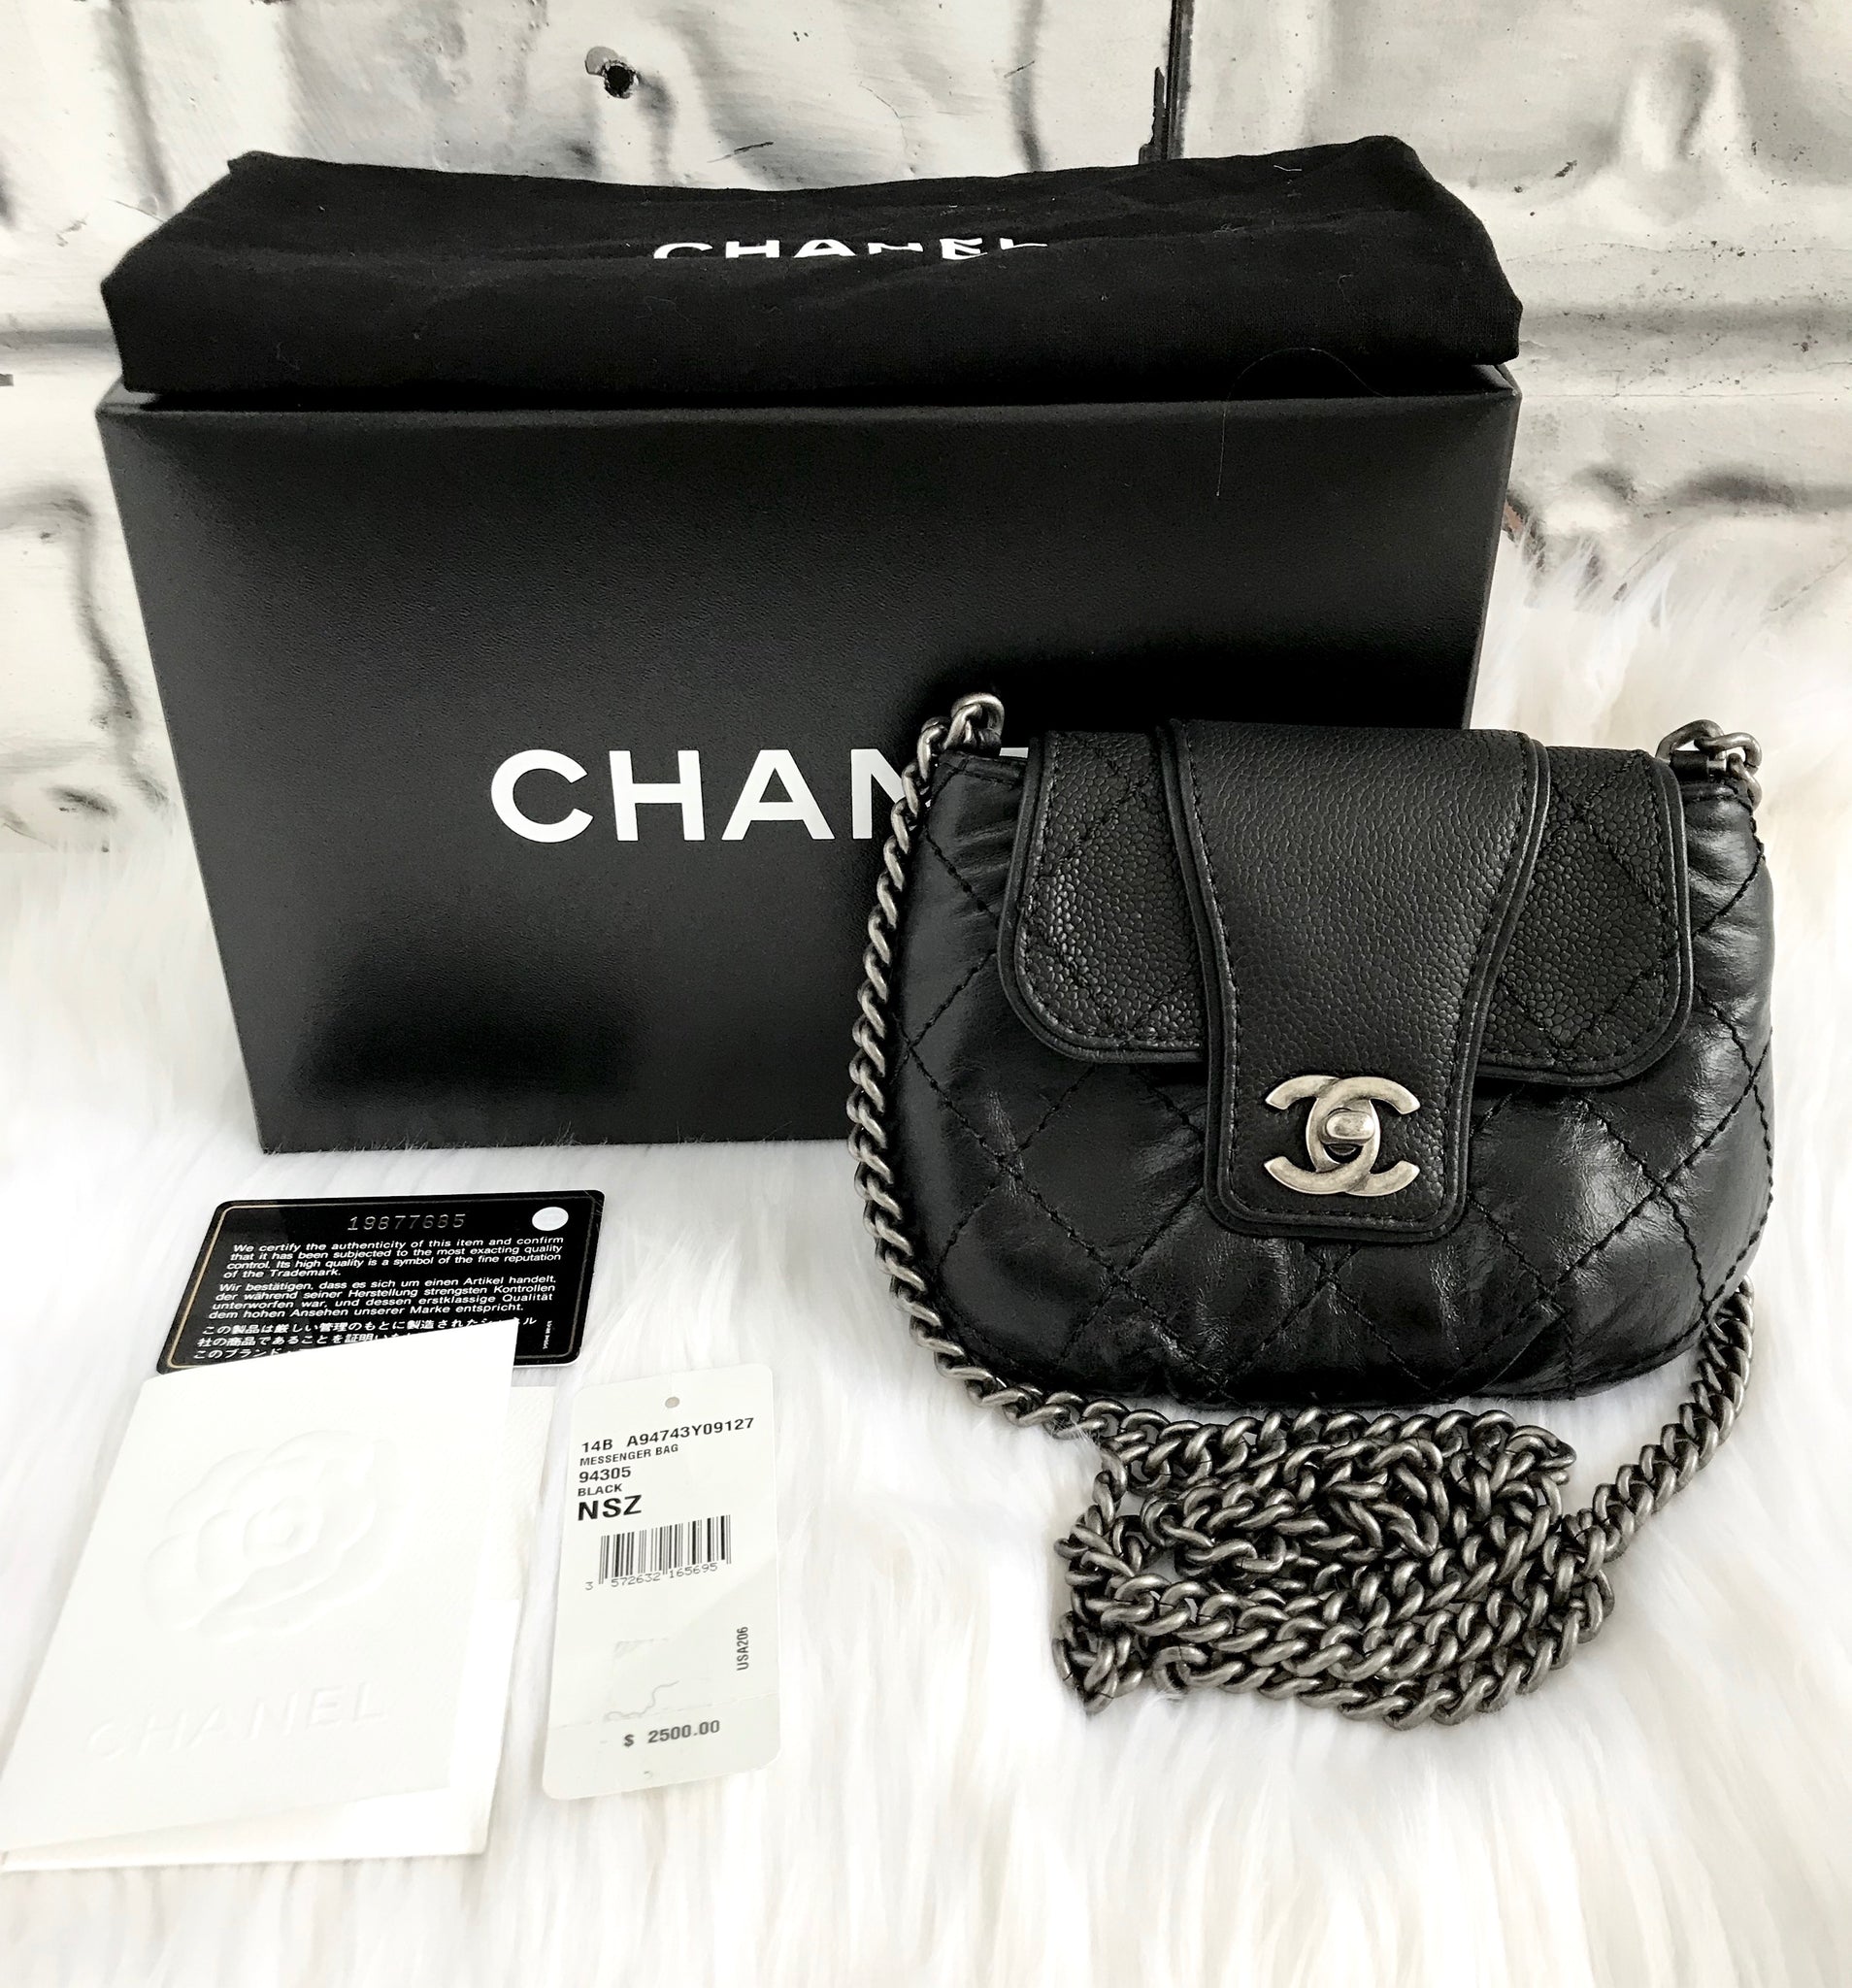 Shop CHANEL 2021 SS Small Messenger Bag (AS2447 B05440 94305) by lufine